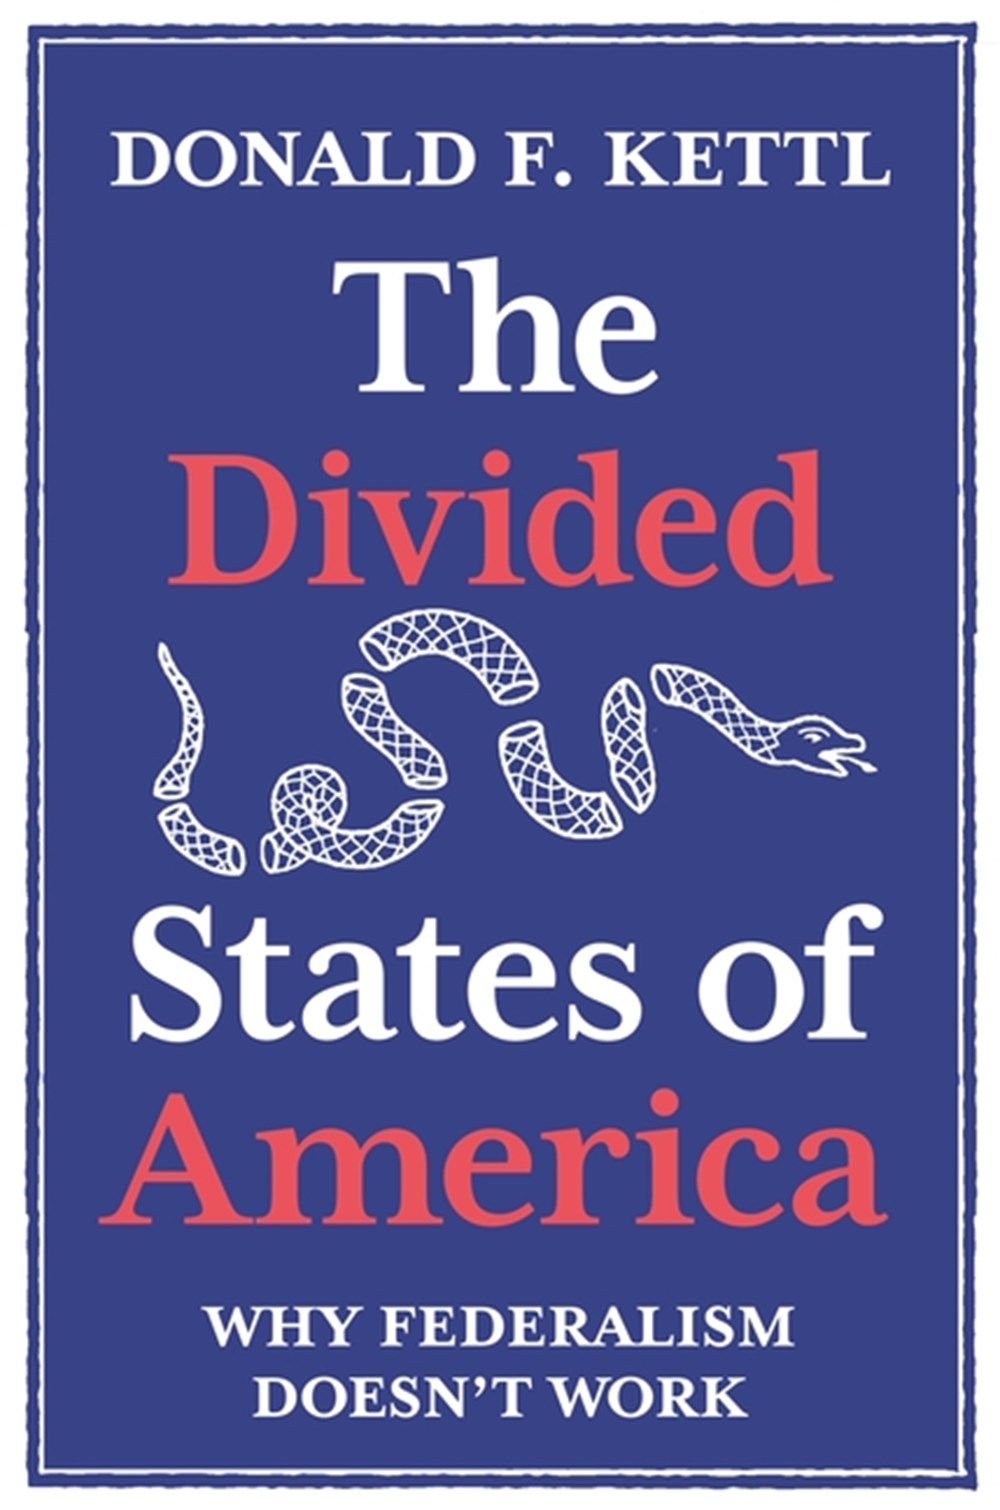 Divided States of America Why Federalism Doesn't Work